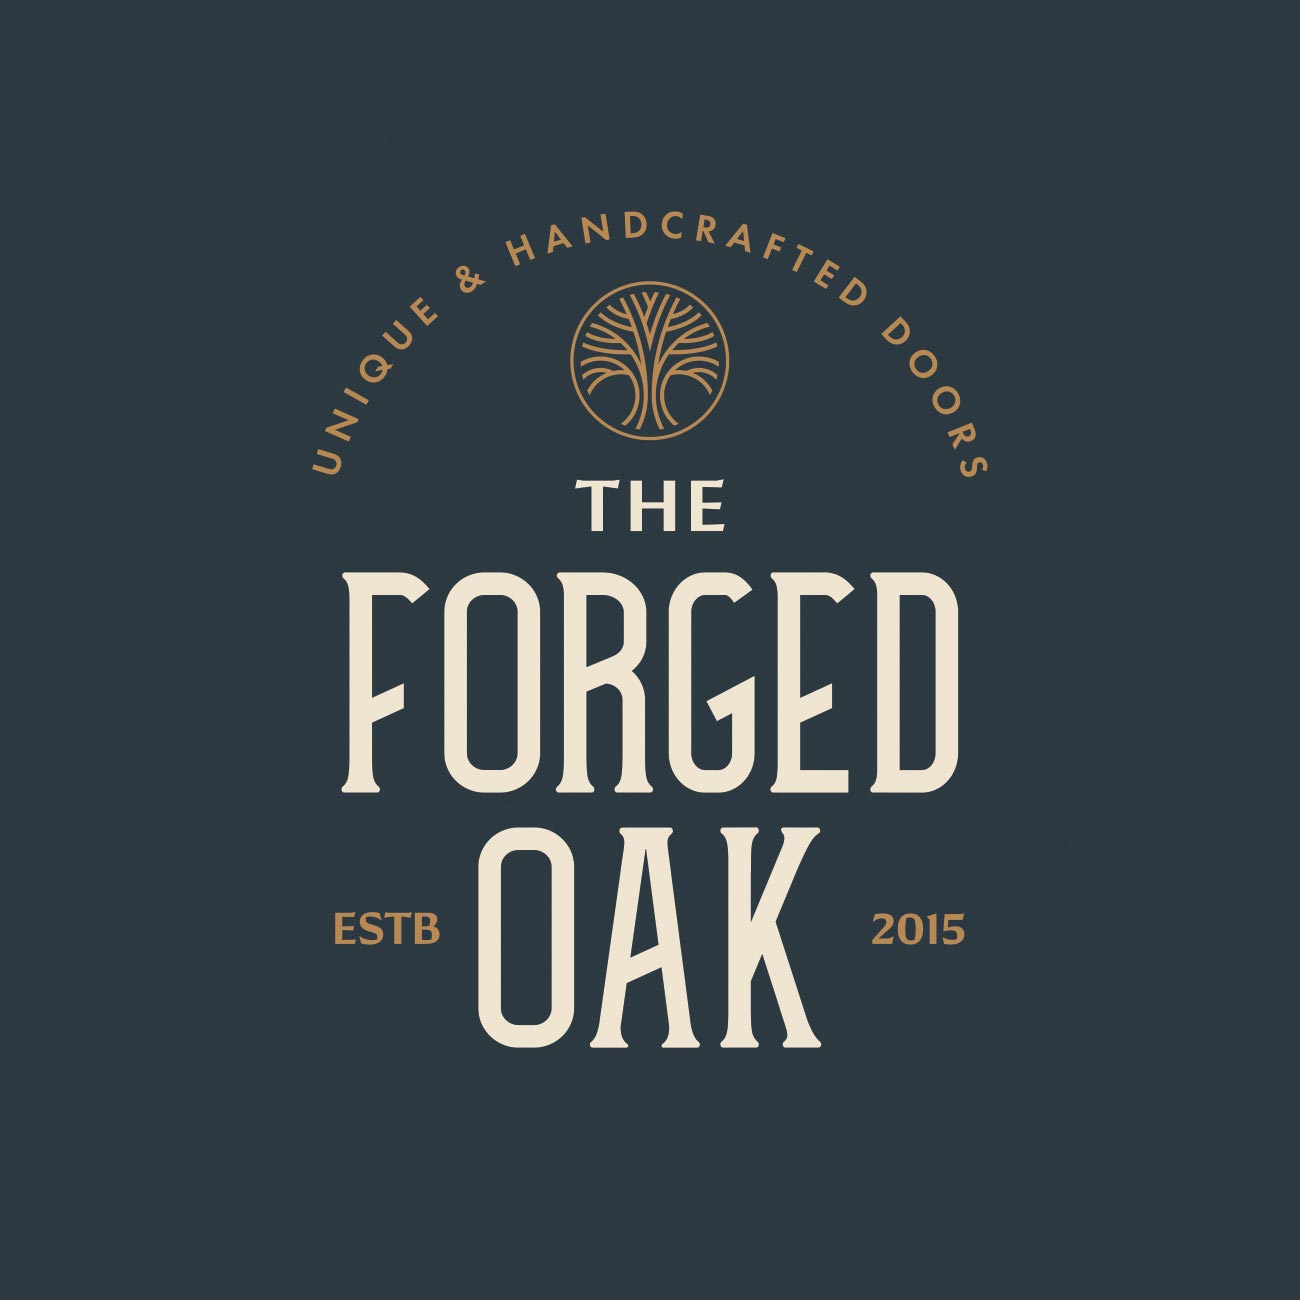 The Forged Oak